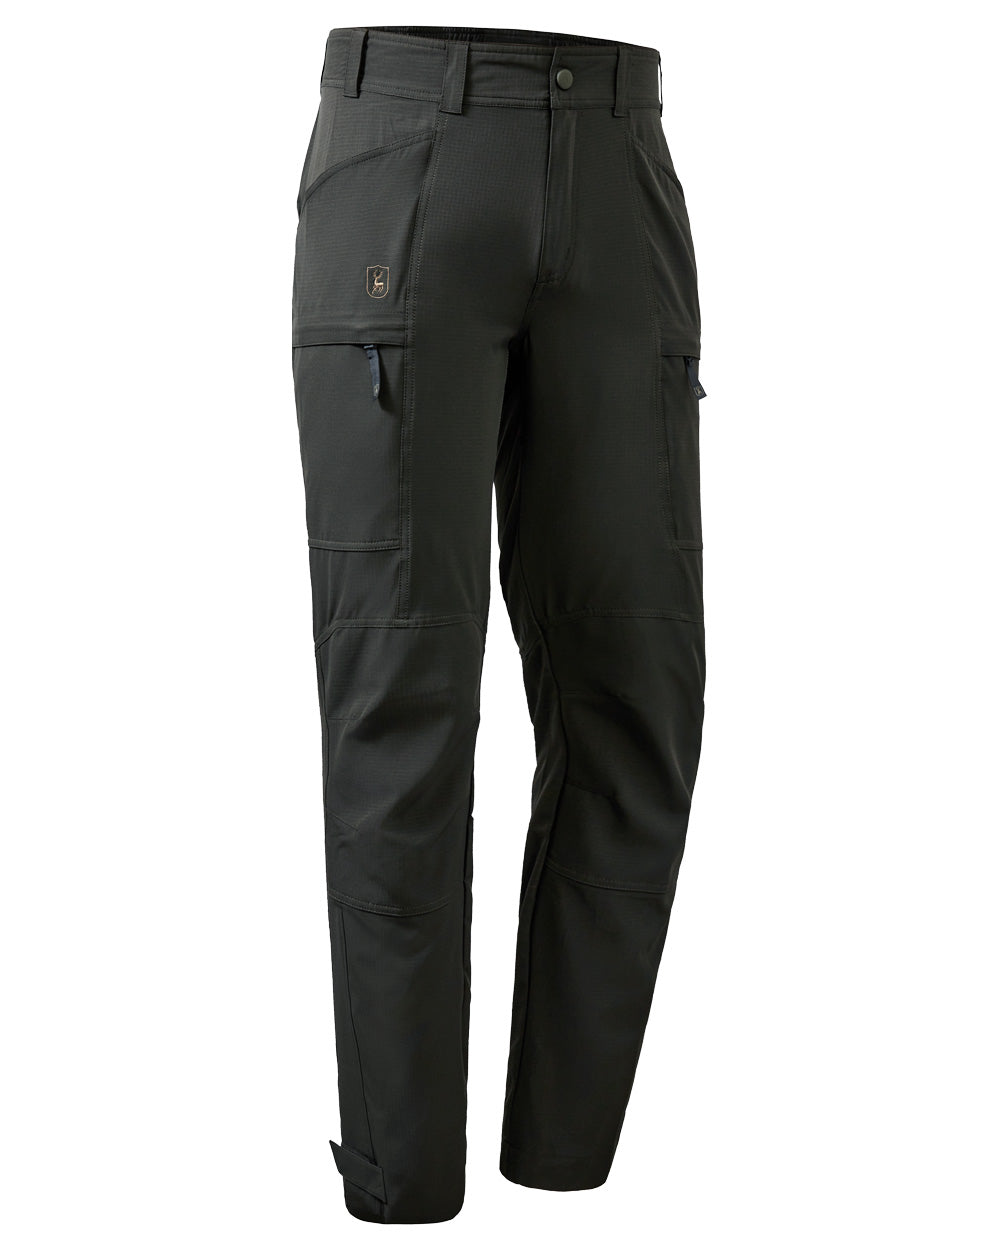 Forest Green coloured Deerhunter Canopy Trousers on White background 